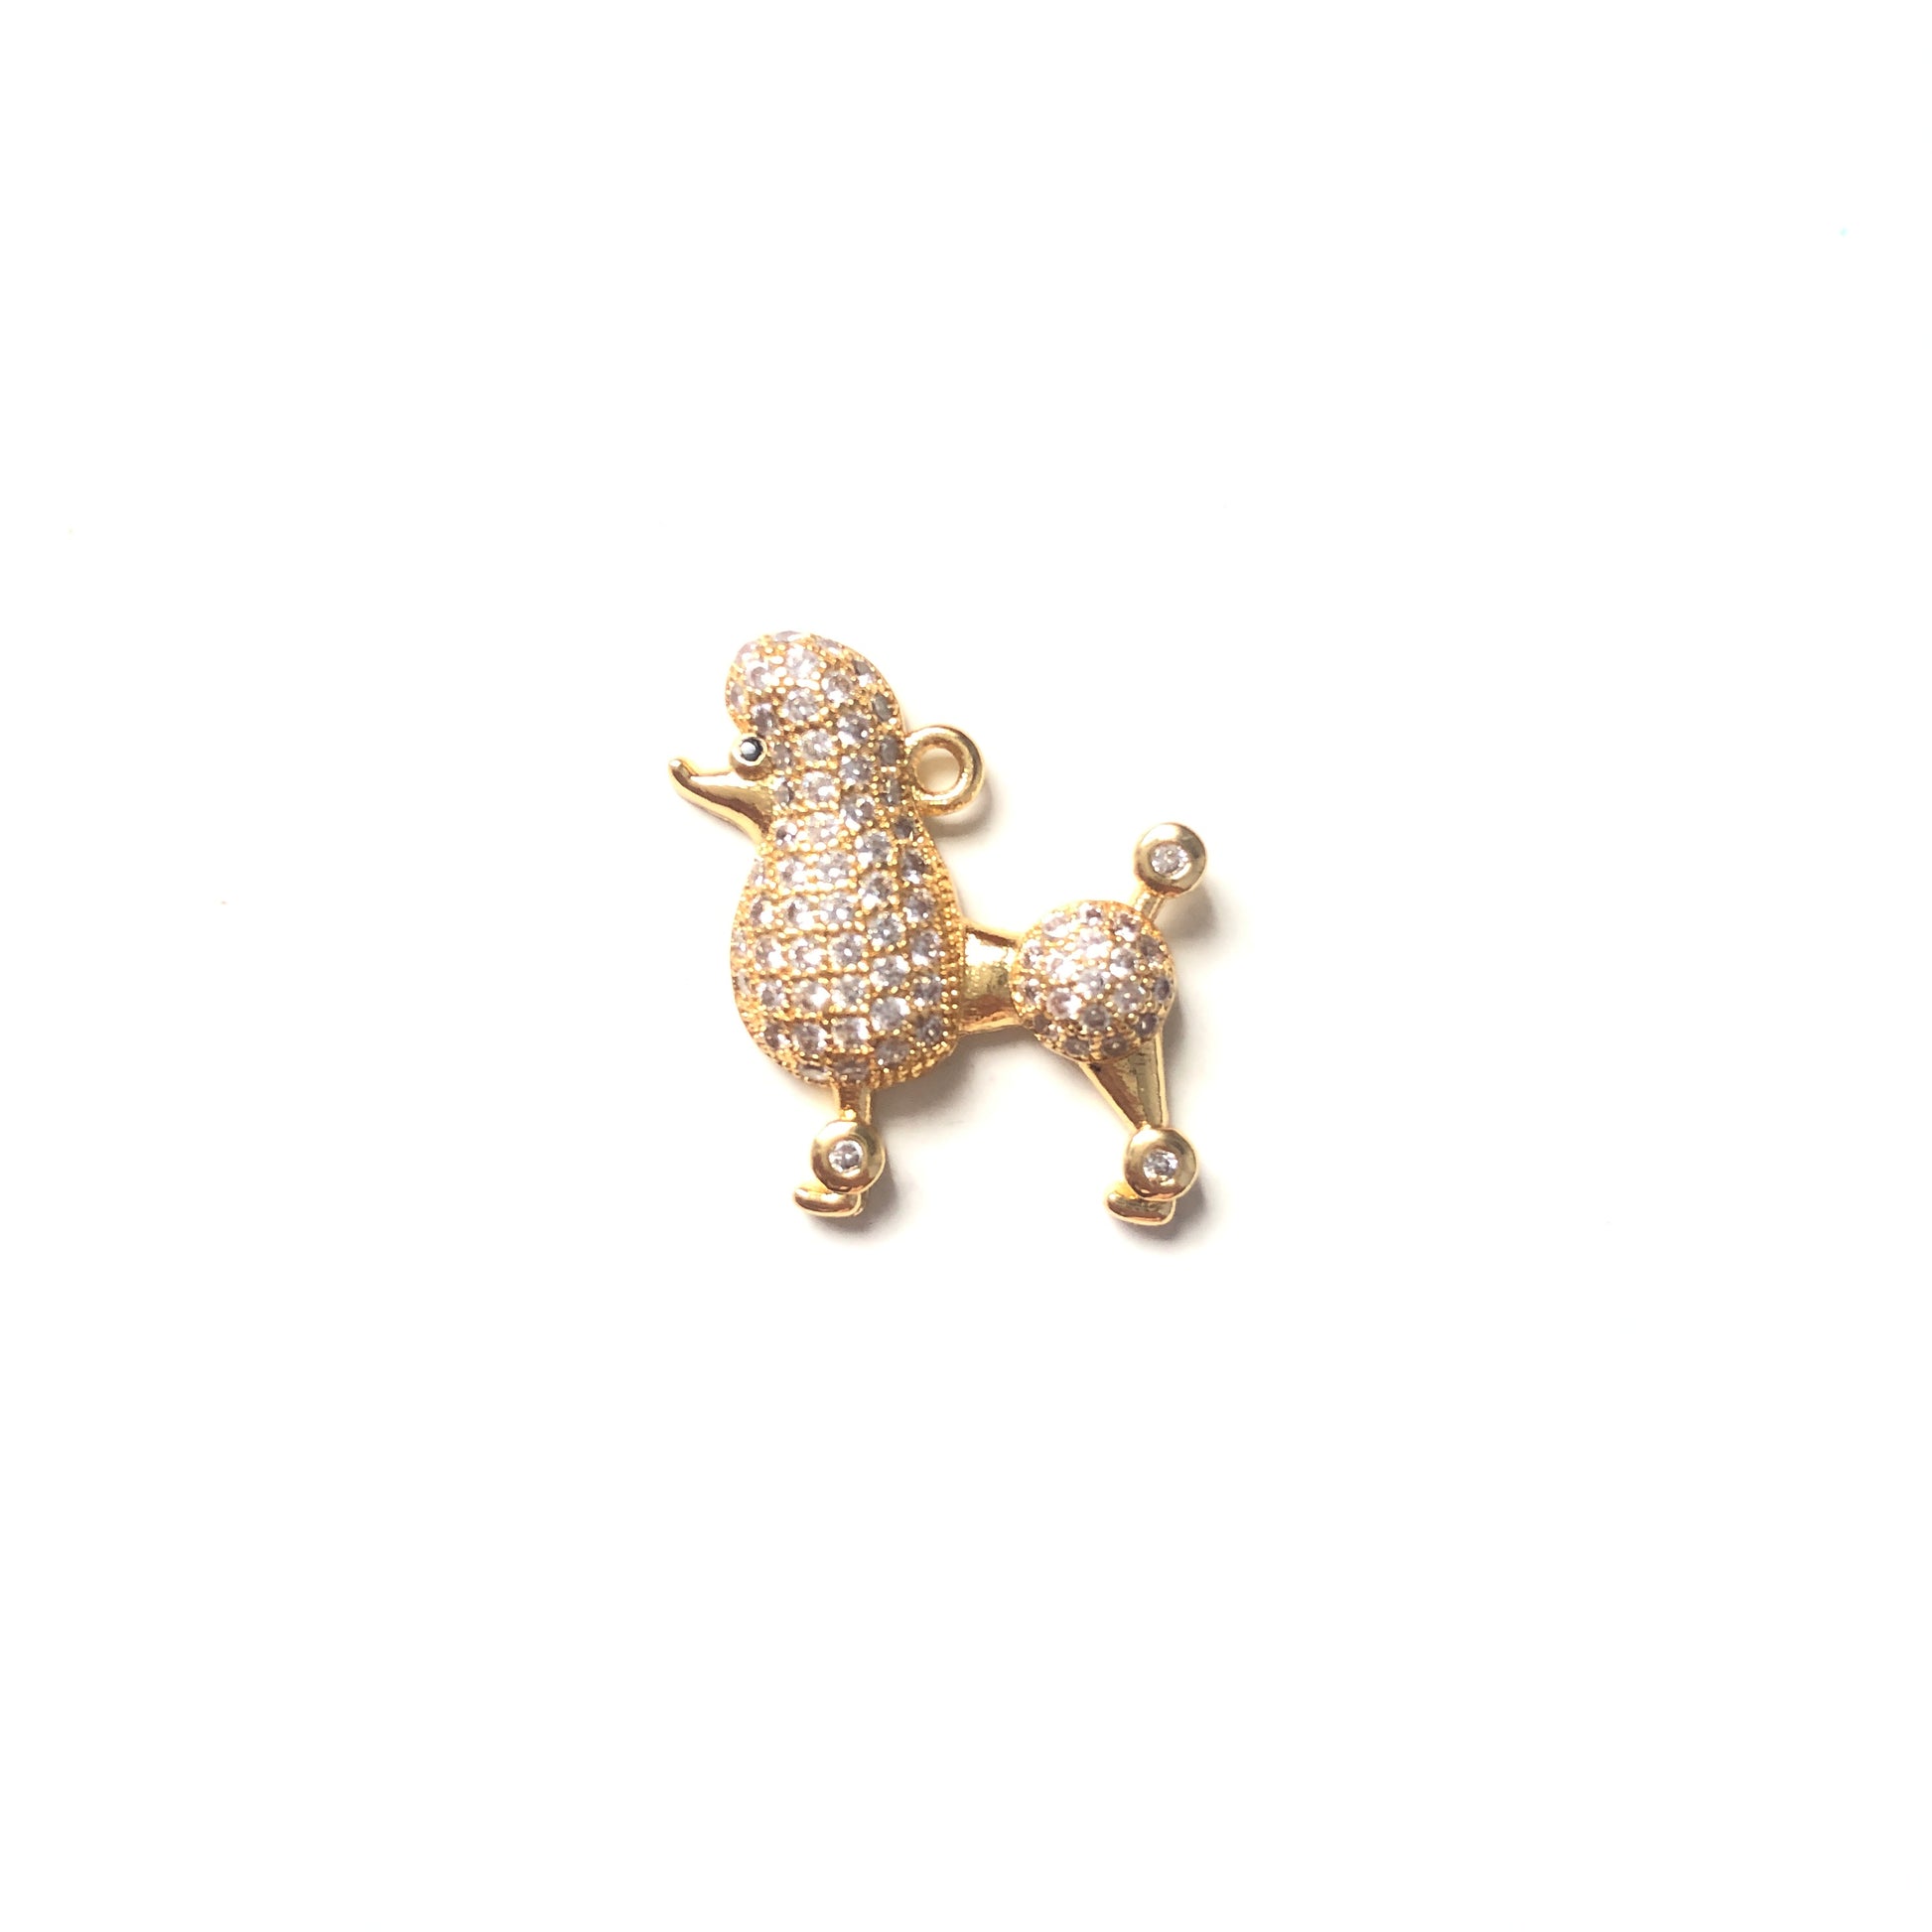 10pcs/lot 19*19mm CZ Paved Poodle Charms Gold CZ Paved Charms Animals & Insects Charms Beads Beyond